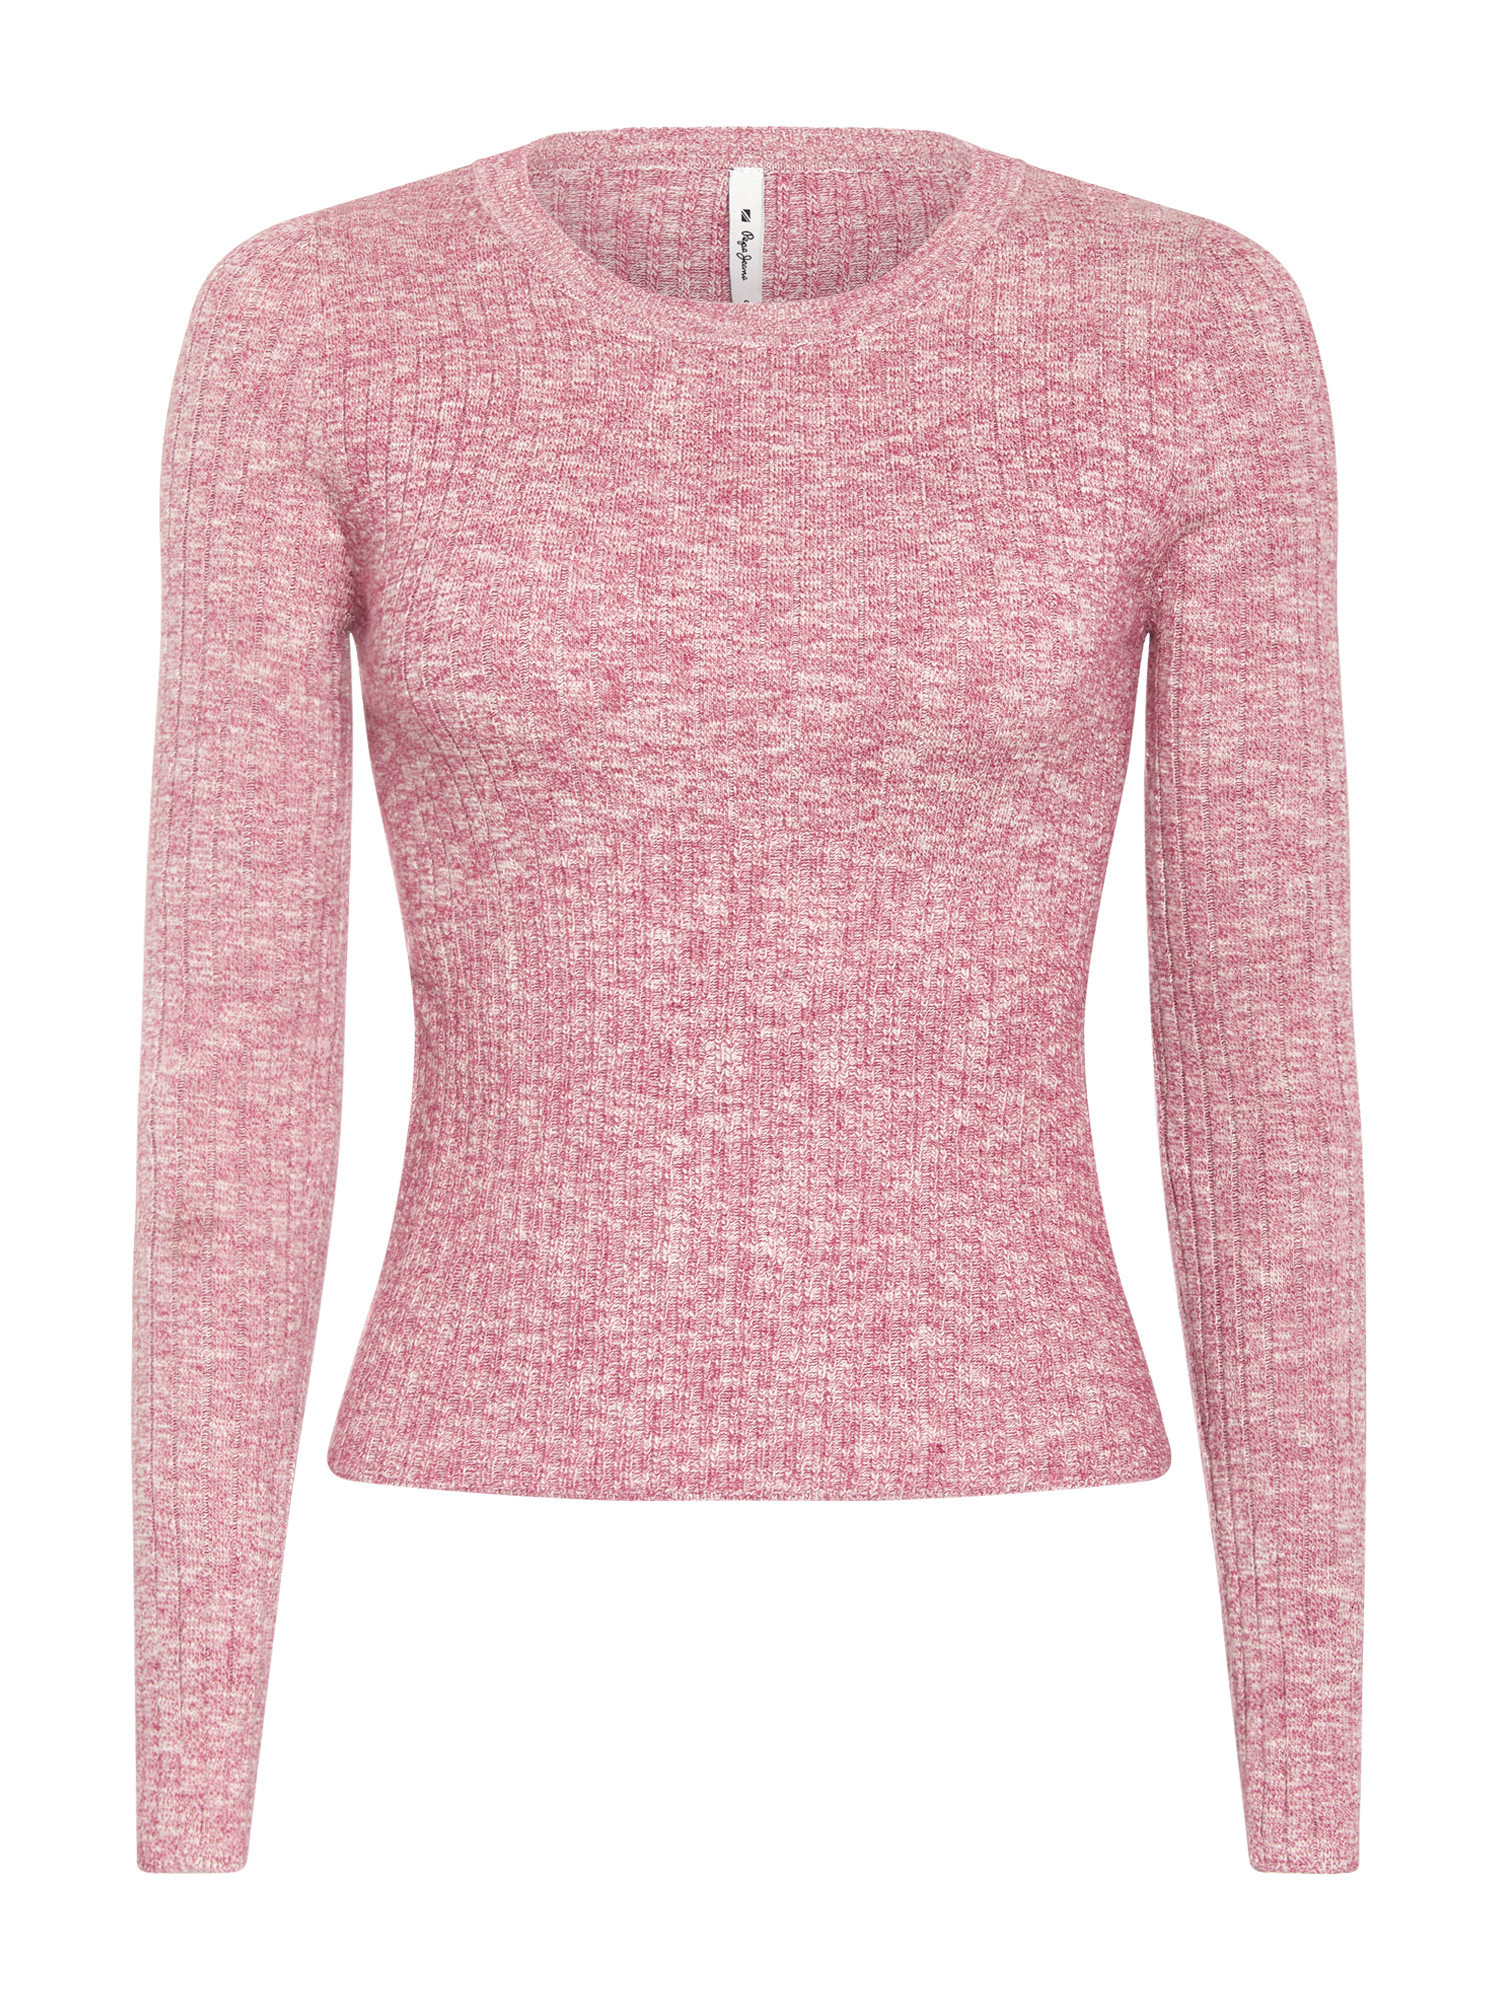 Pepe Jeans - Maglia a costine, Rosa scuro, large image number 0